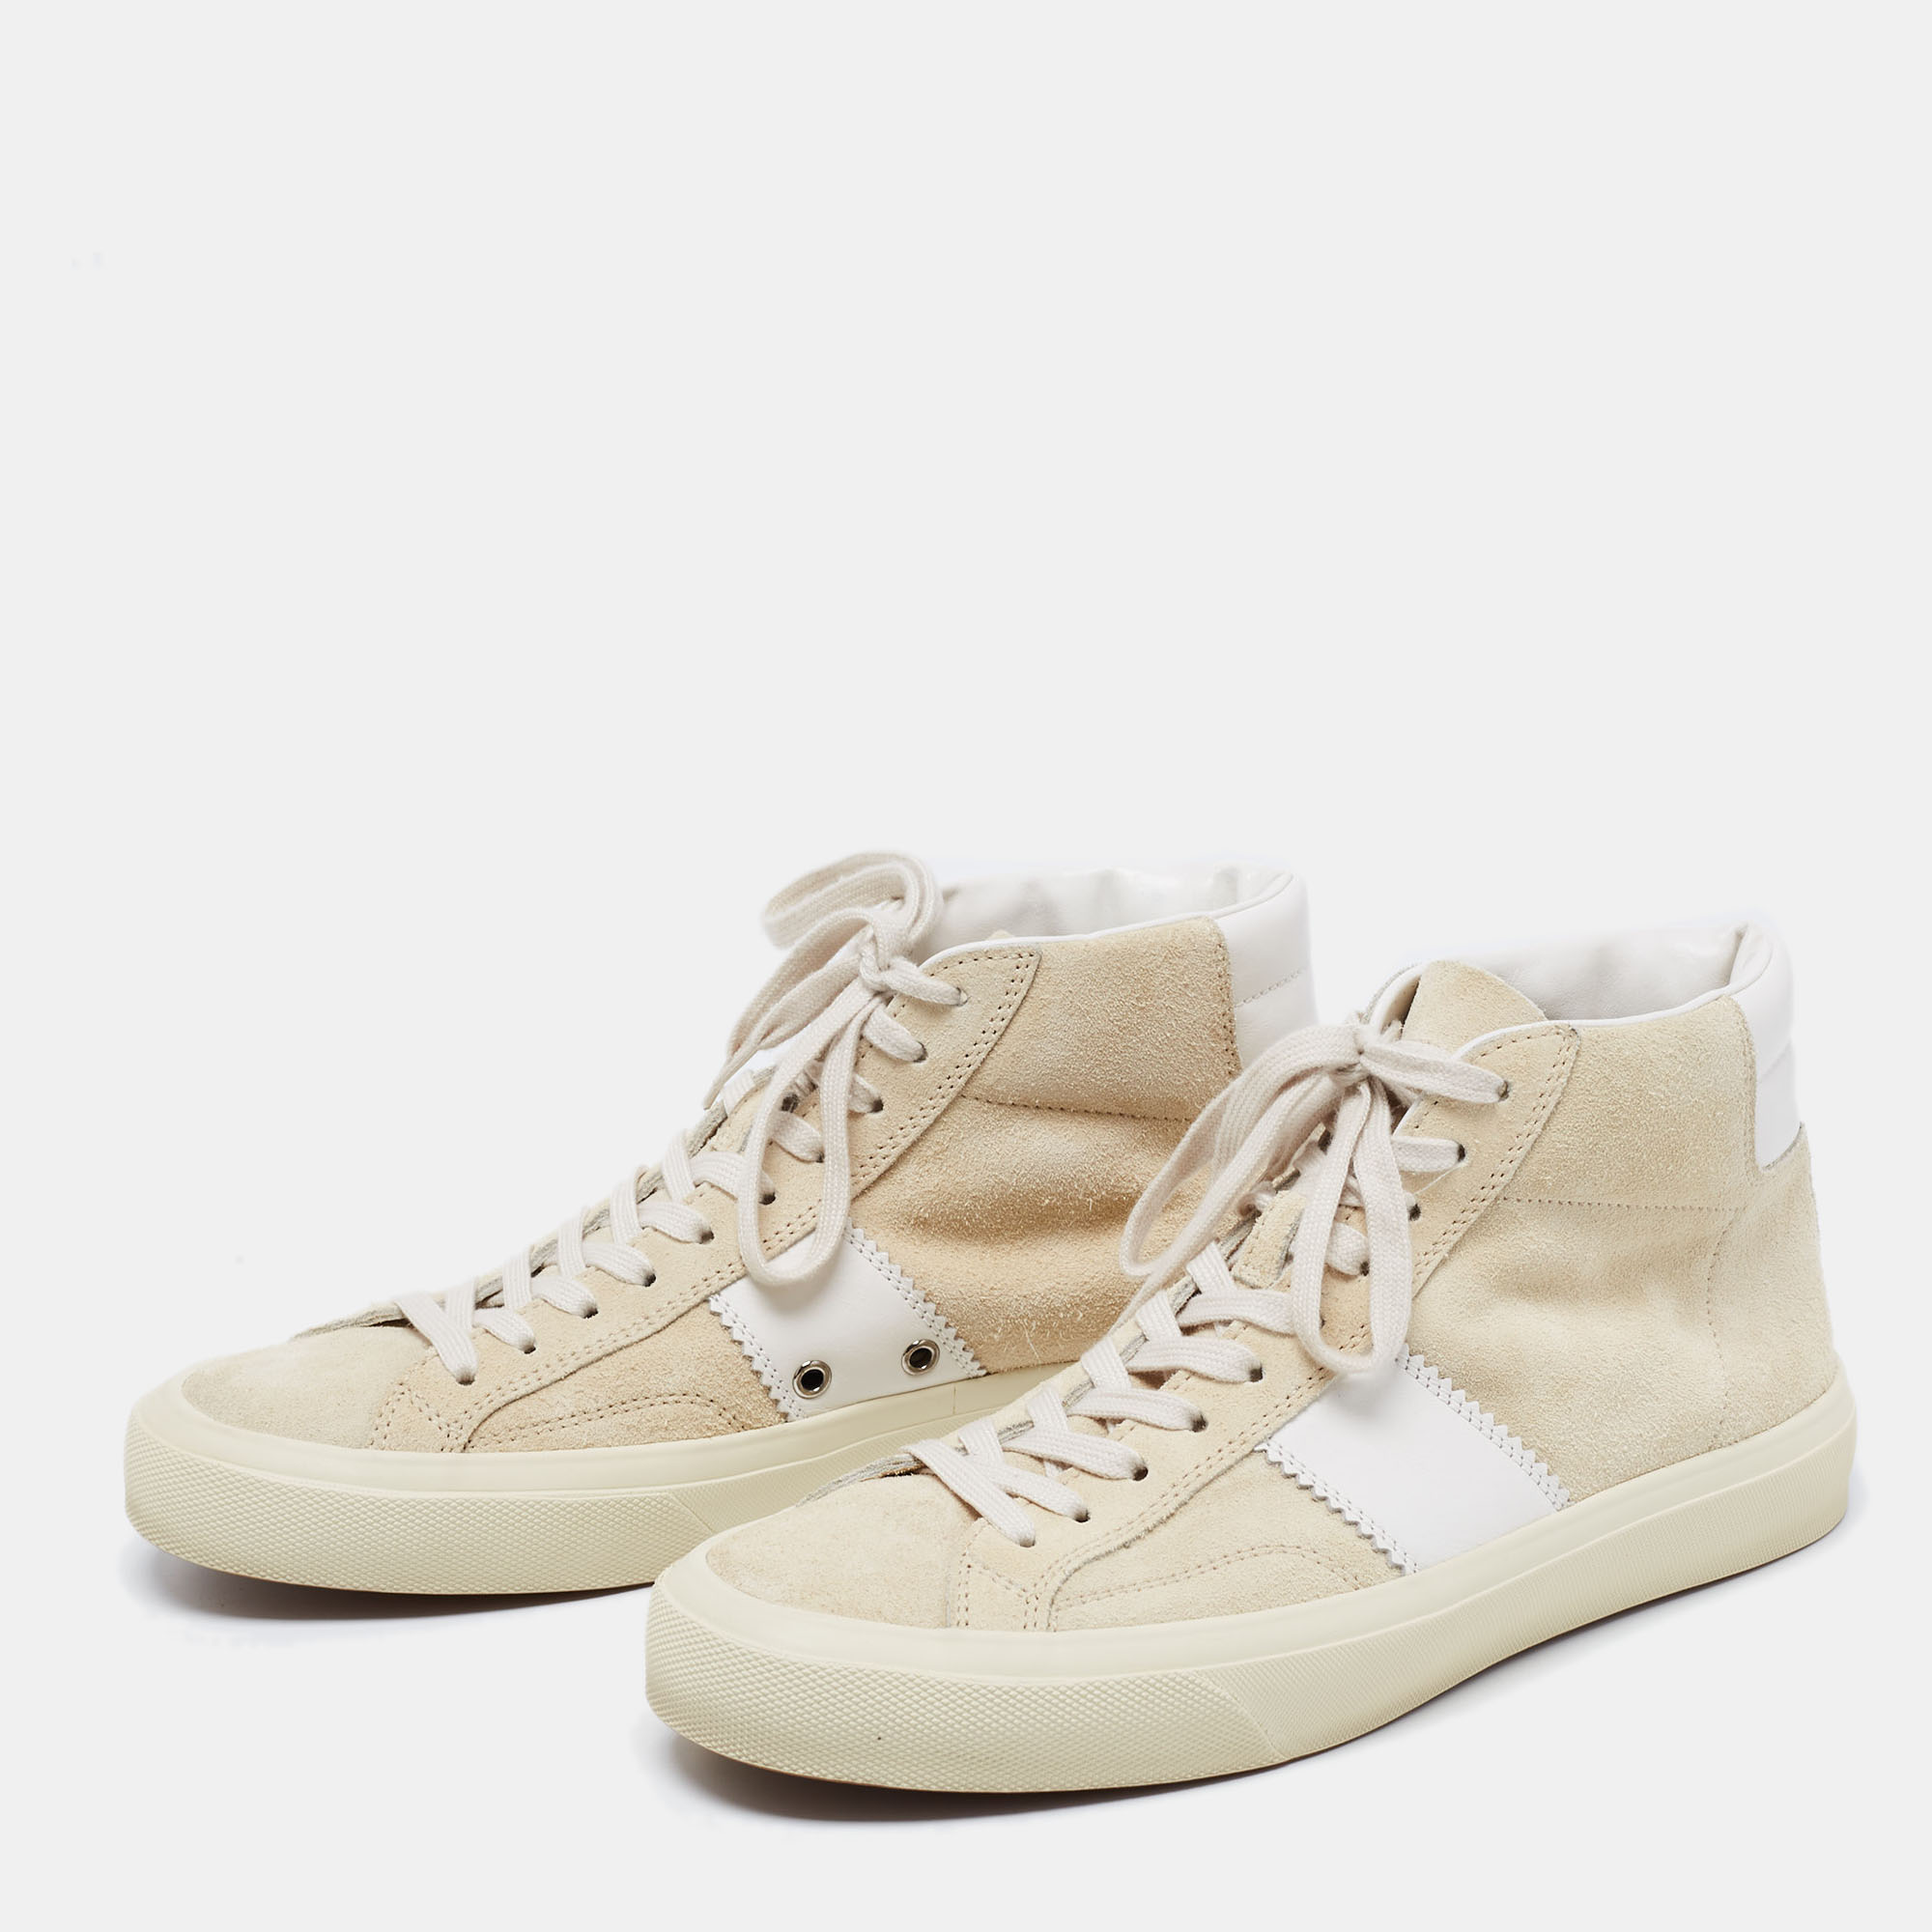 

Tom Ford Beige/White Suede and Leather Cambridge High Top Sneakers Size